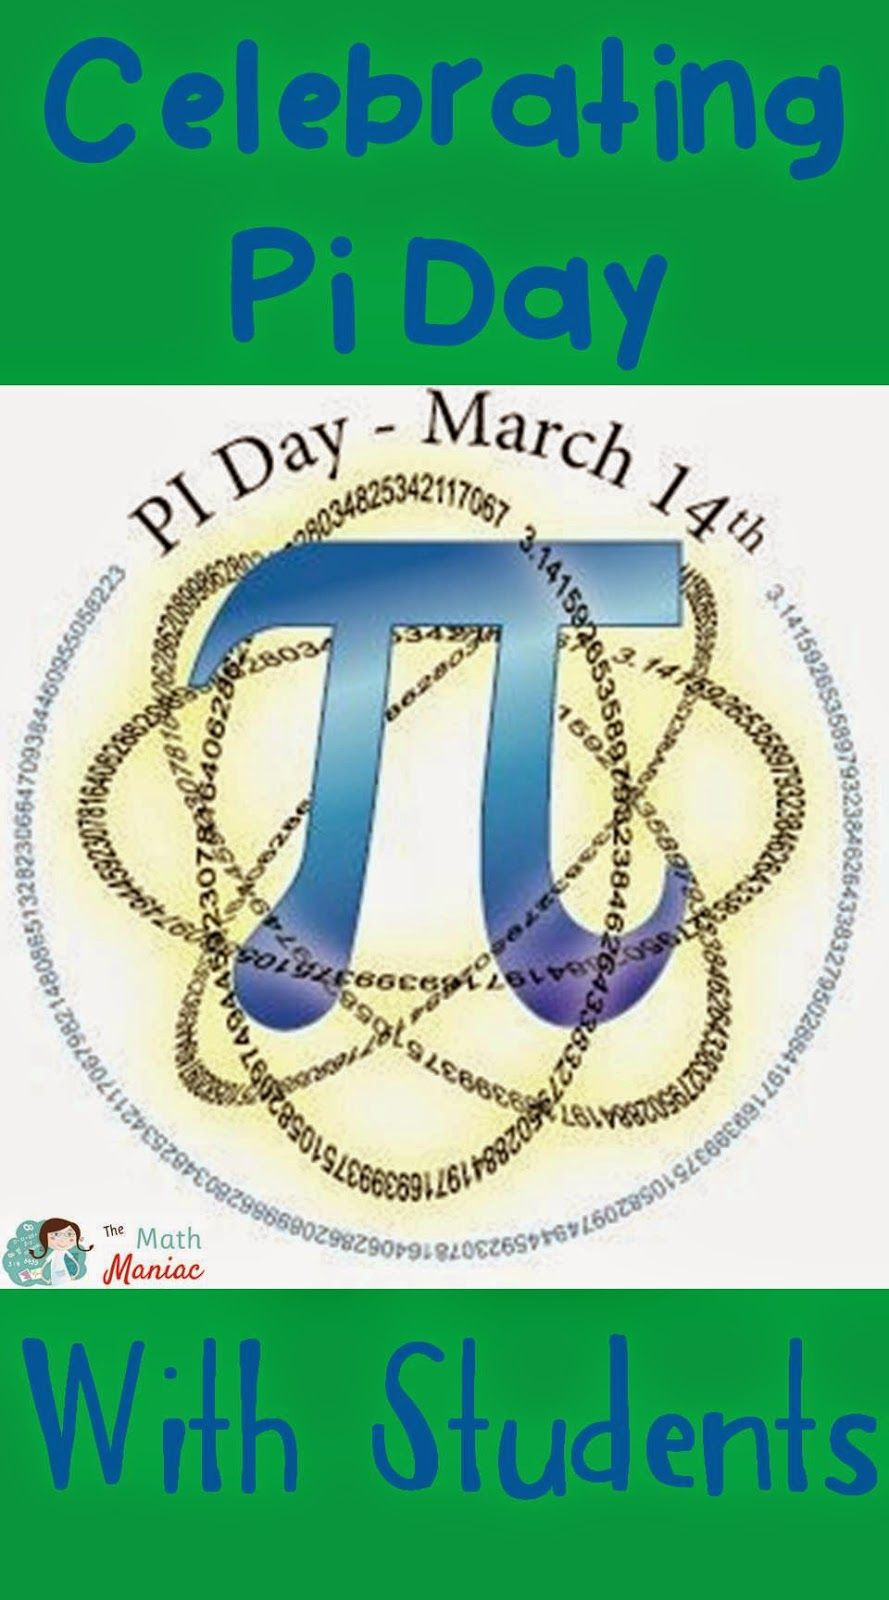 Pi Day Activities For 6th Grade
 Ideas for celebrating Pi day with upper elementary and